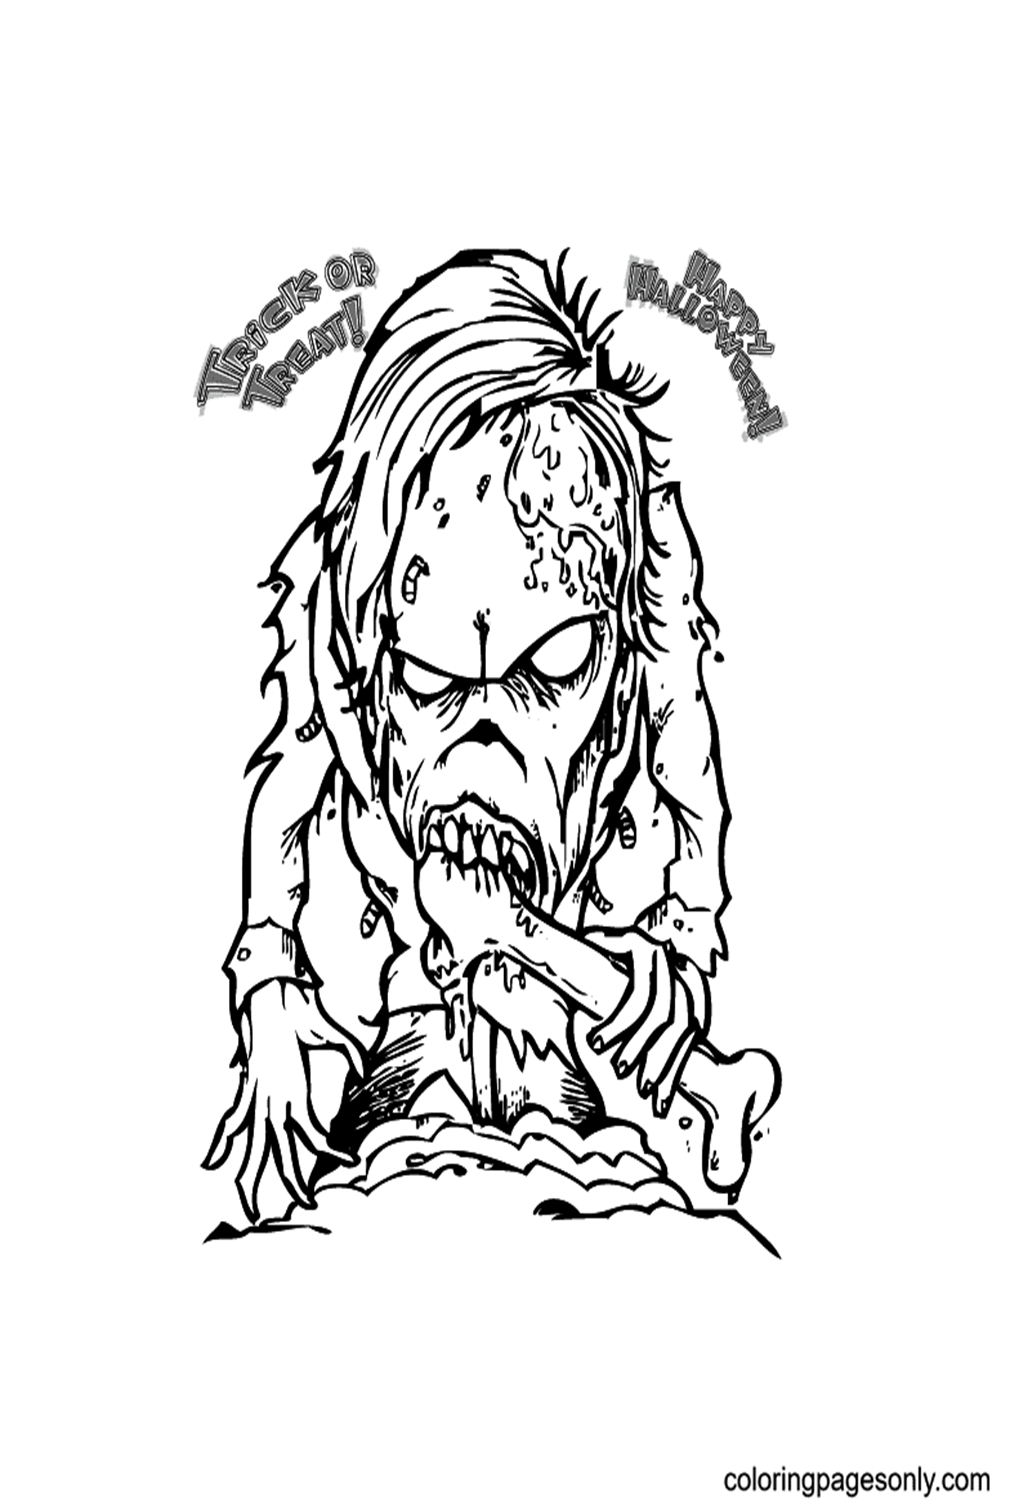 Scary Monster on Halloween Coloring Pages